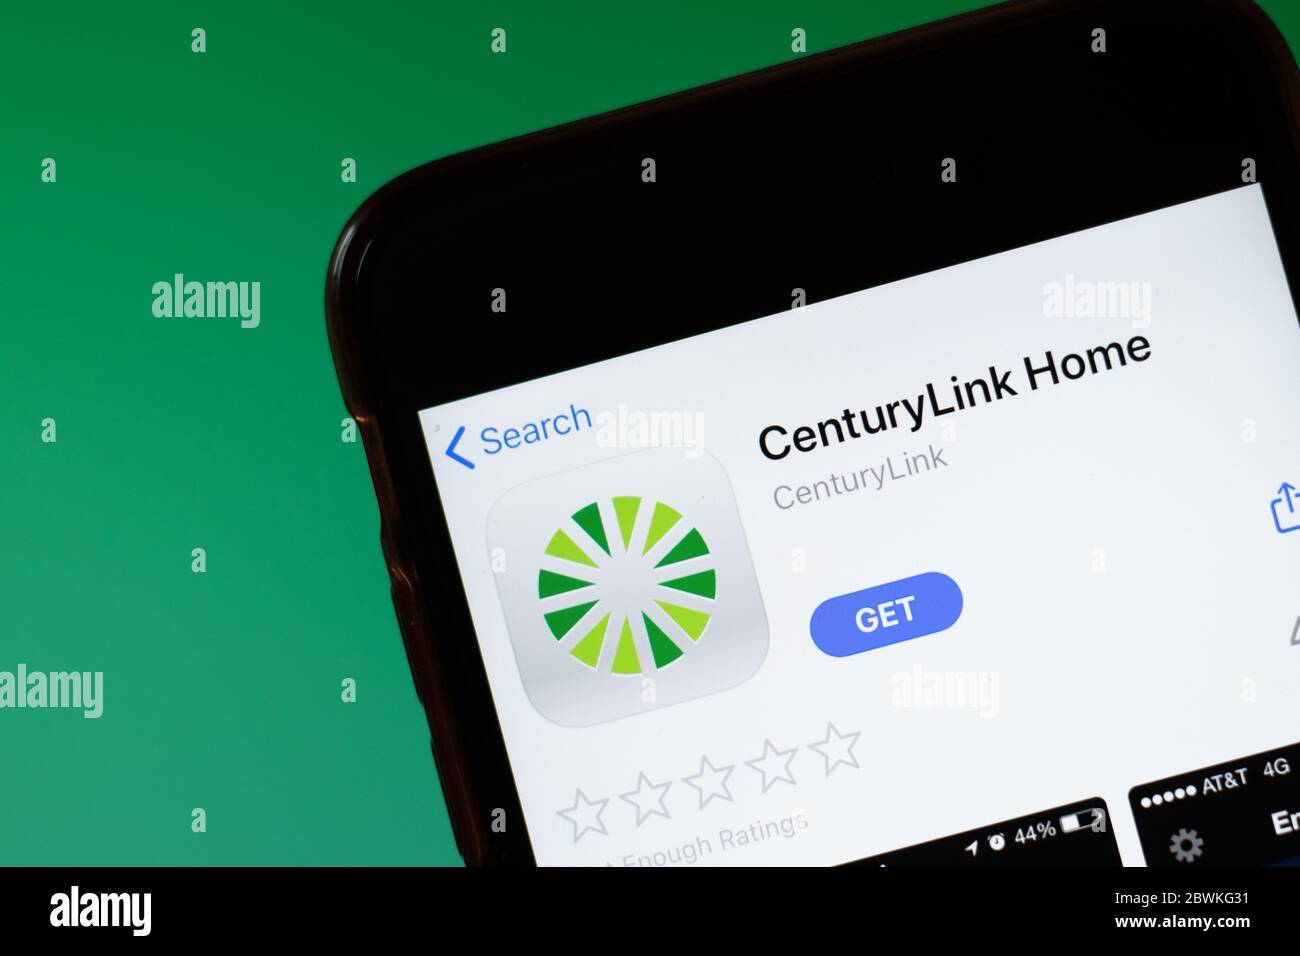 Moscow, Russia - 1 June 2020: CenturyLink Home app mobile logo close-up on screen display, Illustrative Editorial. Stock Photo